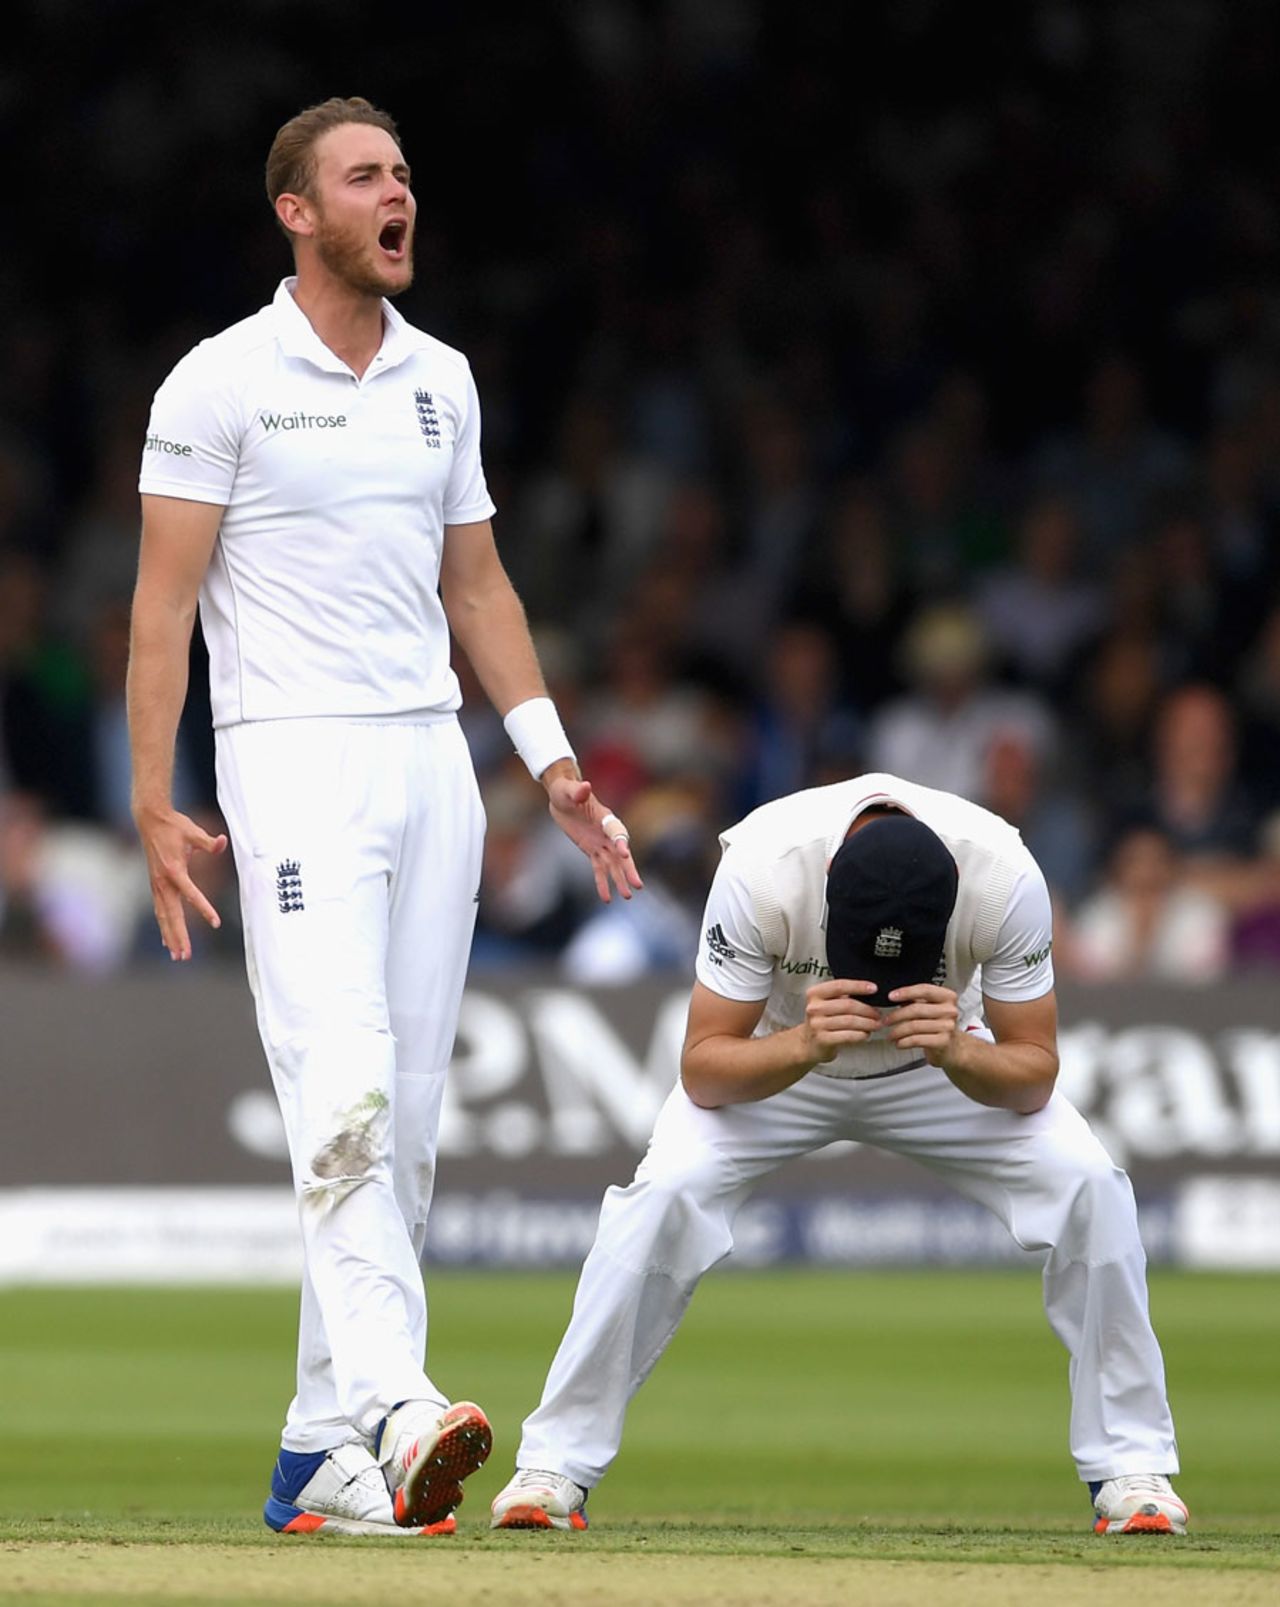 Stuart Broad saw an edge fly wide of slip, England v Pakistan, 1st Investec Test, Lord's, 1st day, July 14, 2016